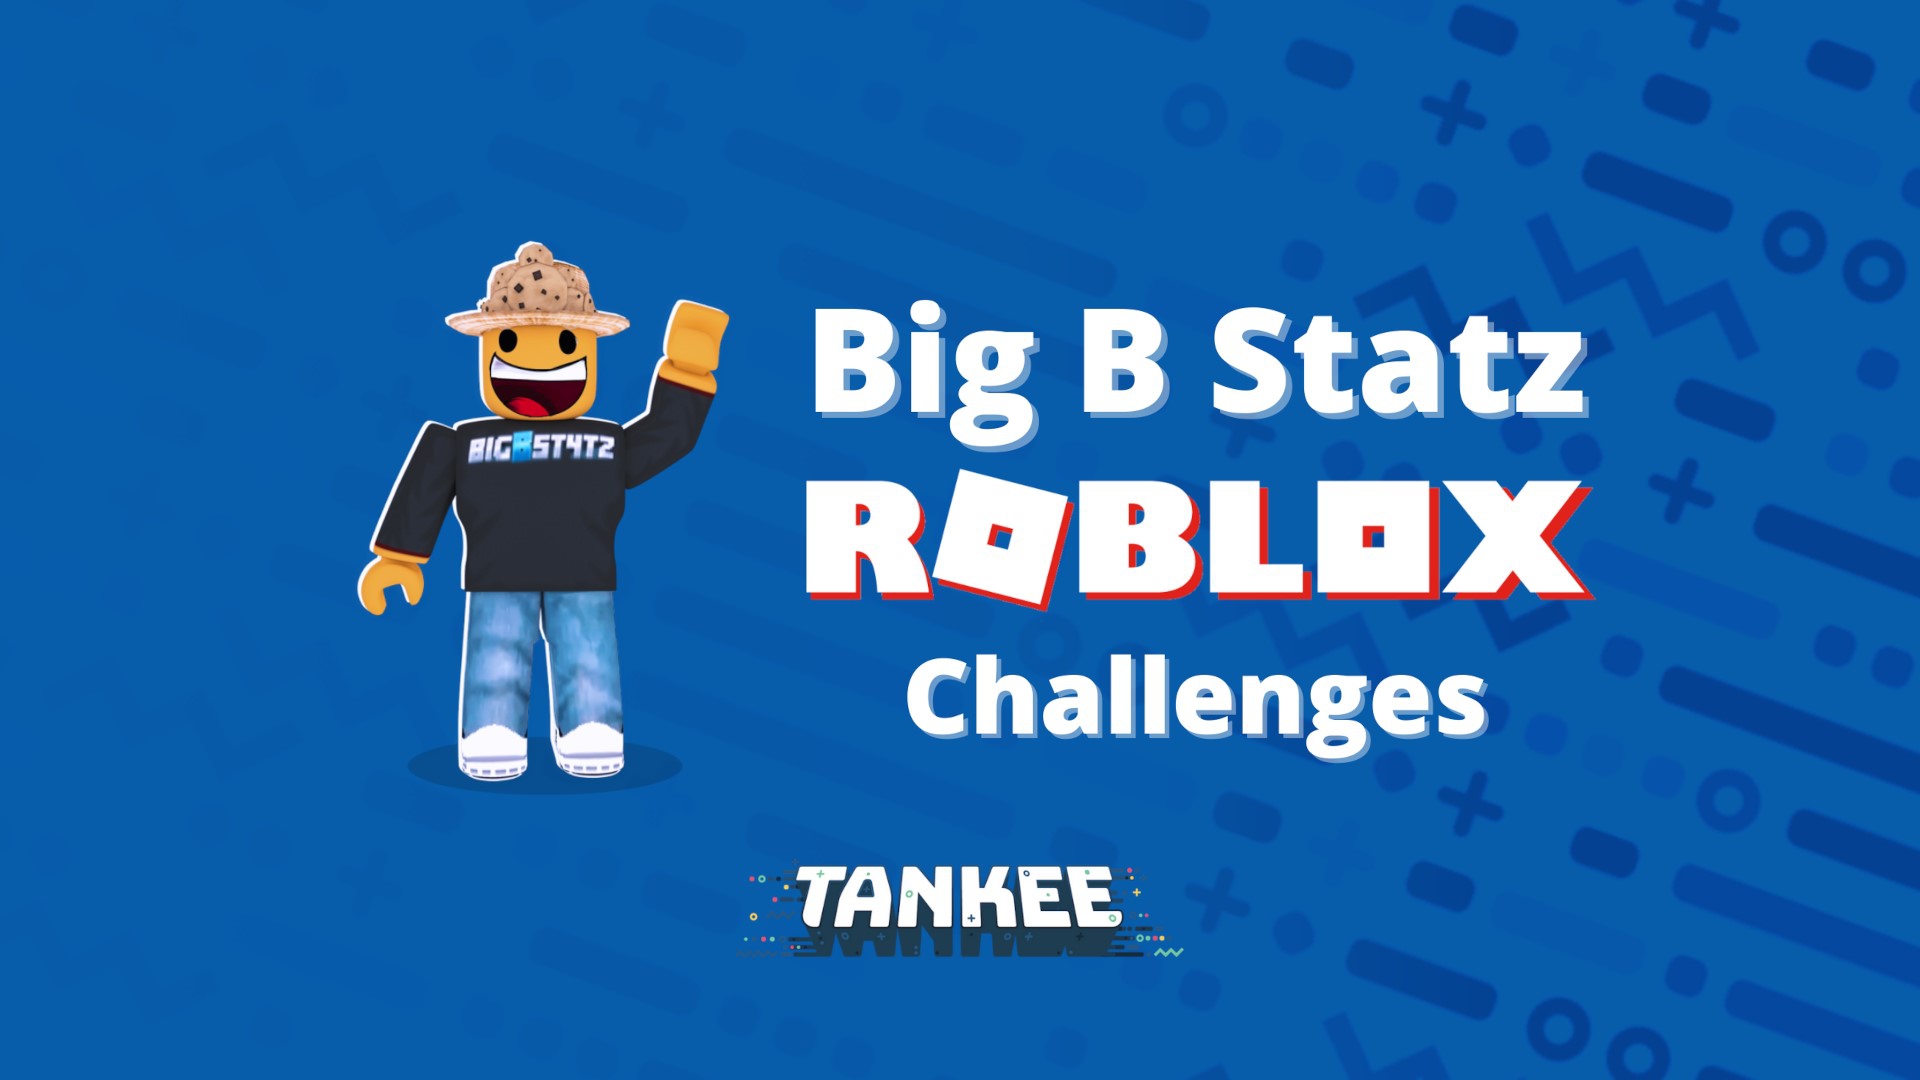 Bigb Roblox Challenges By Tankee Season 2 Episodes Streaming Online For Free The Roku Channel Roku - roblox try not to laugh 19